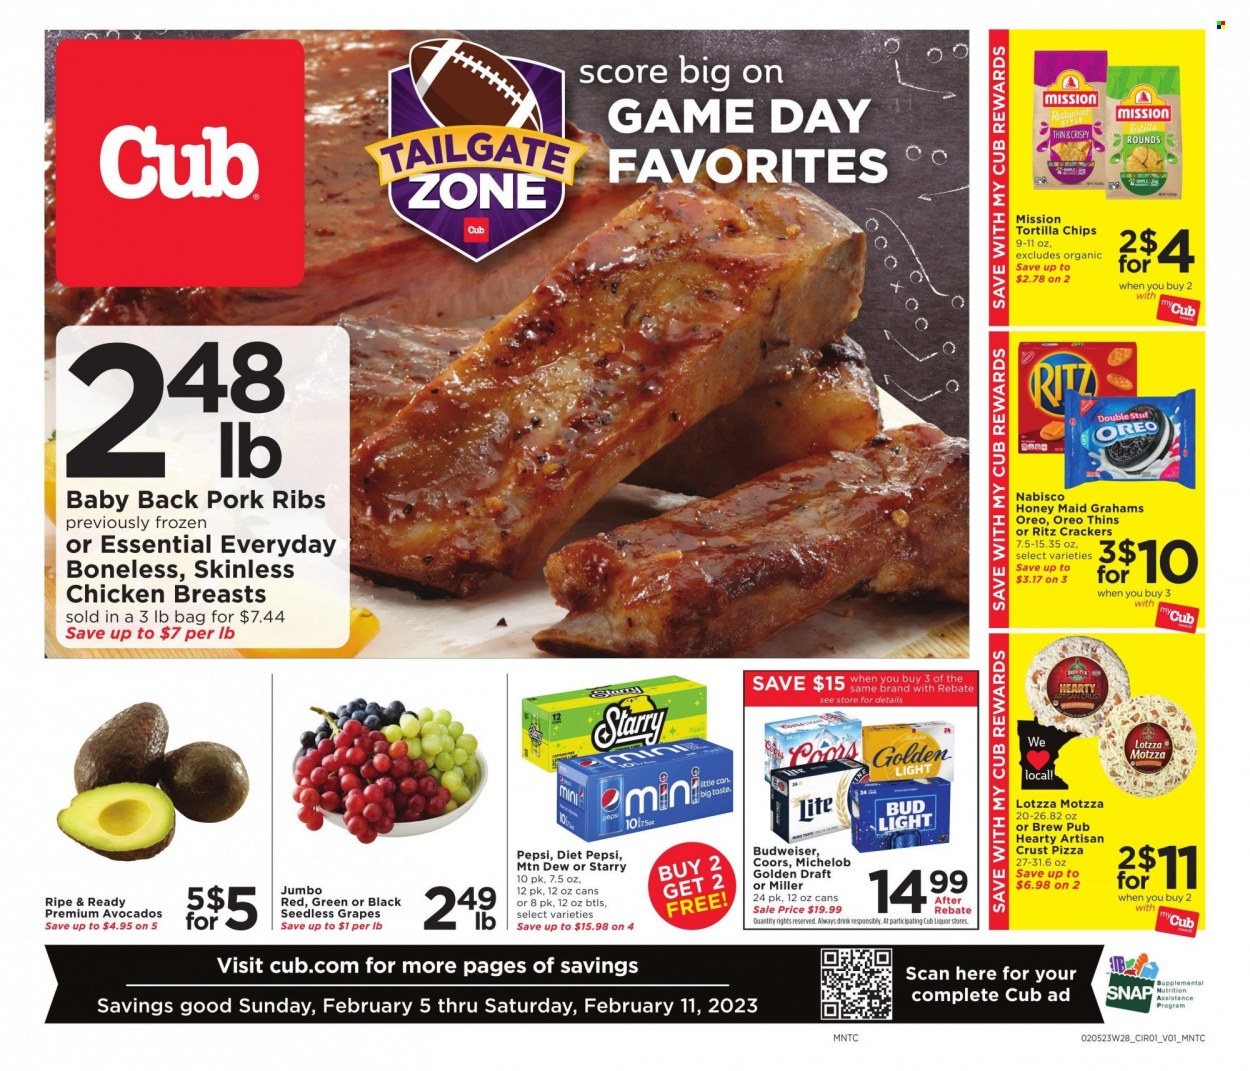 thumbnail - Cub Foods Flyer - 02/05/2023 - 02/11/2023 - Sales products - avocado, grapes, seedless grapes, pizza, Oreo, crackers, RITZ, tortilla chips, Thins, Honey Maid, Mountain Dew, Pepsi, Diet Pepsi, beer, Bud Light, Miller, chicken breasts, ribs, pork meat, pork ribs, pork back ribs, Budweiser, Coors, Michelob. Page 1.